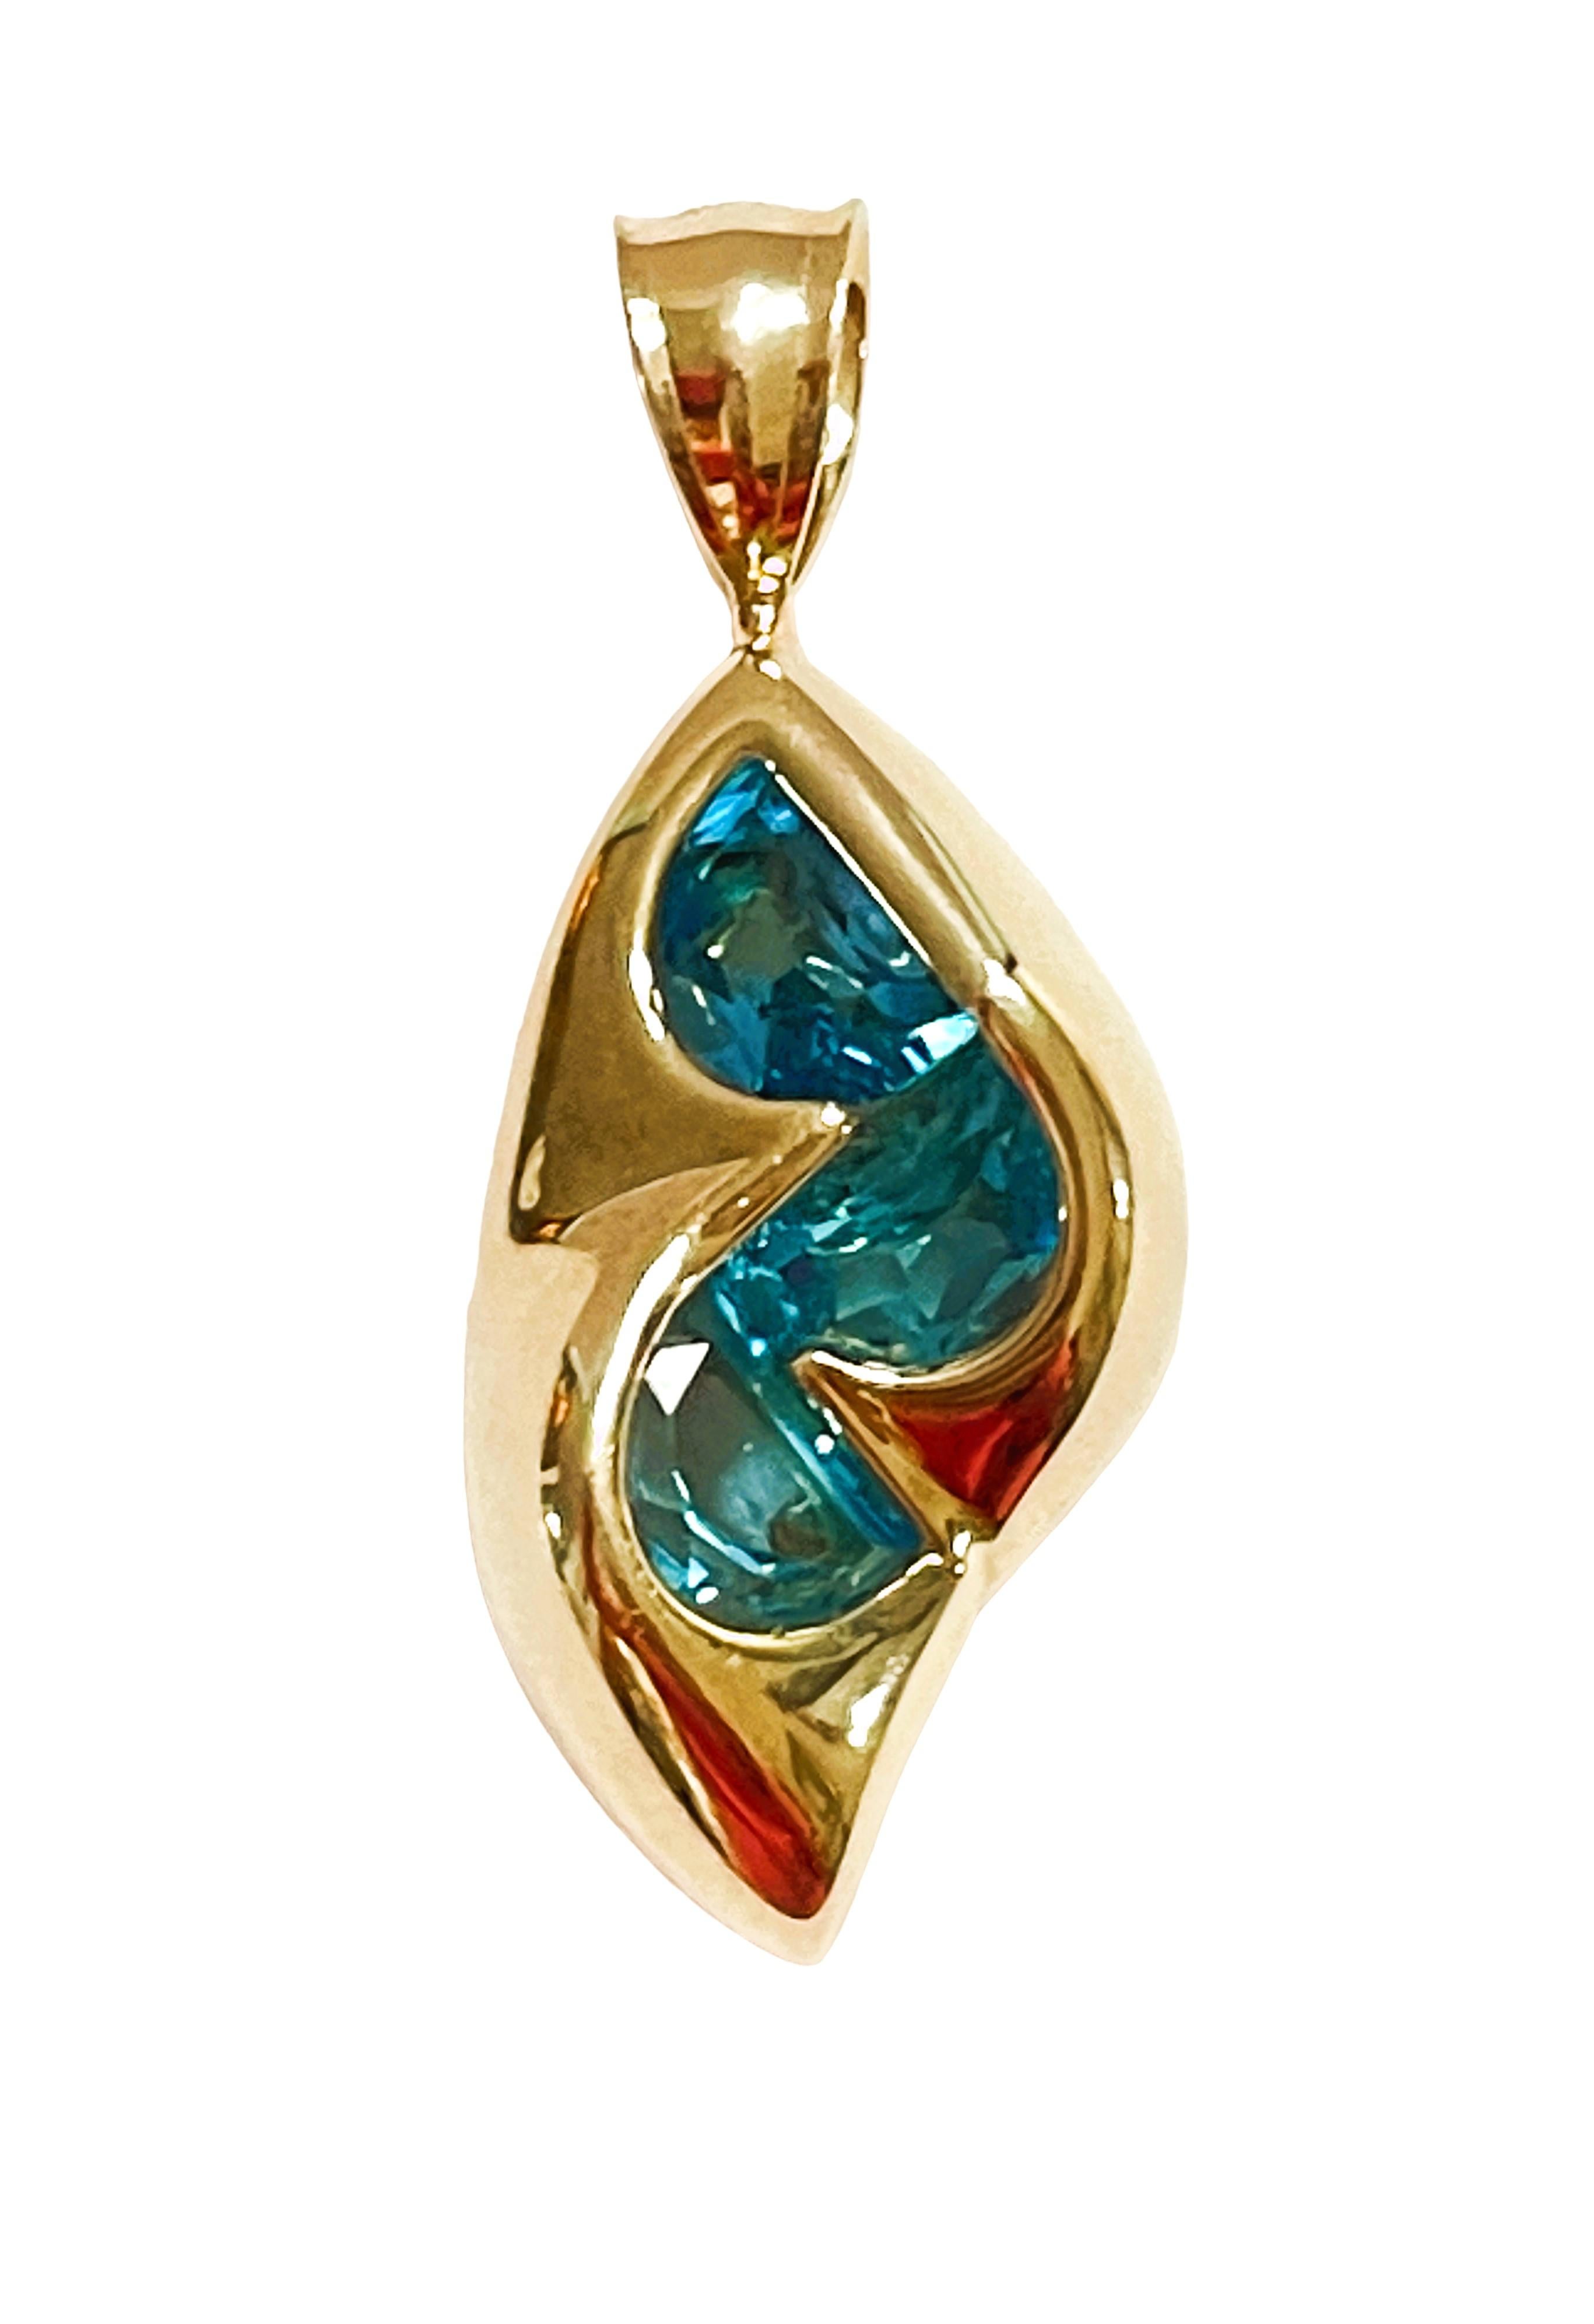 14k Yellow Gold Handmade Fancy Cut Blue Topaz Pendant with Appraisal In Excellent Condition For Sale In Eagan, MN